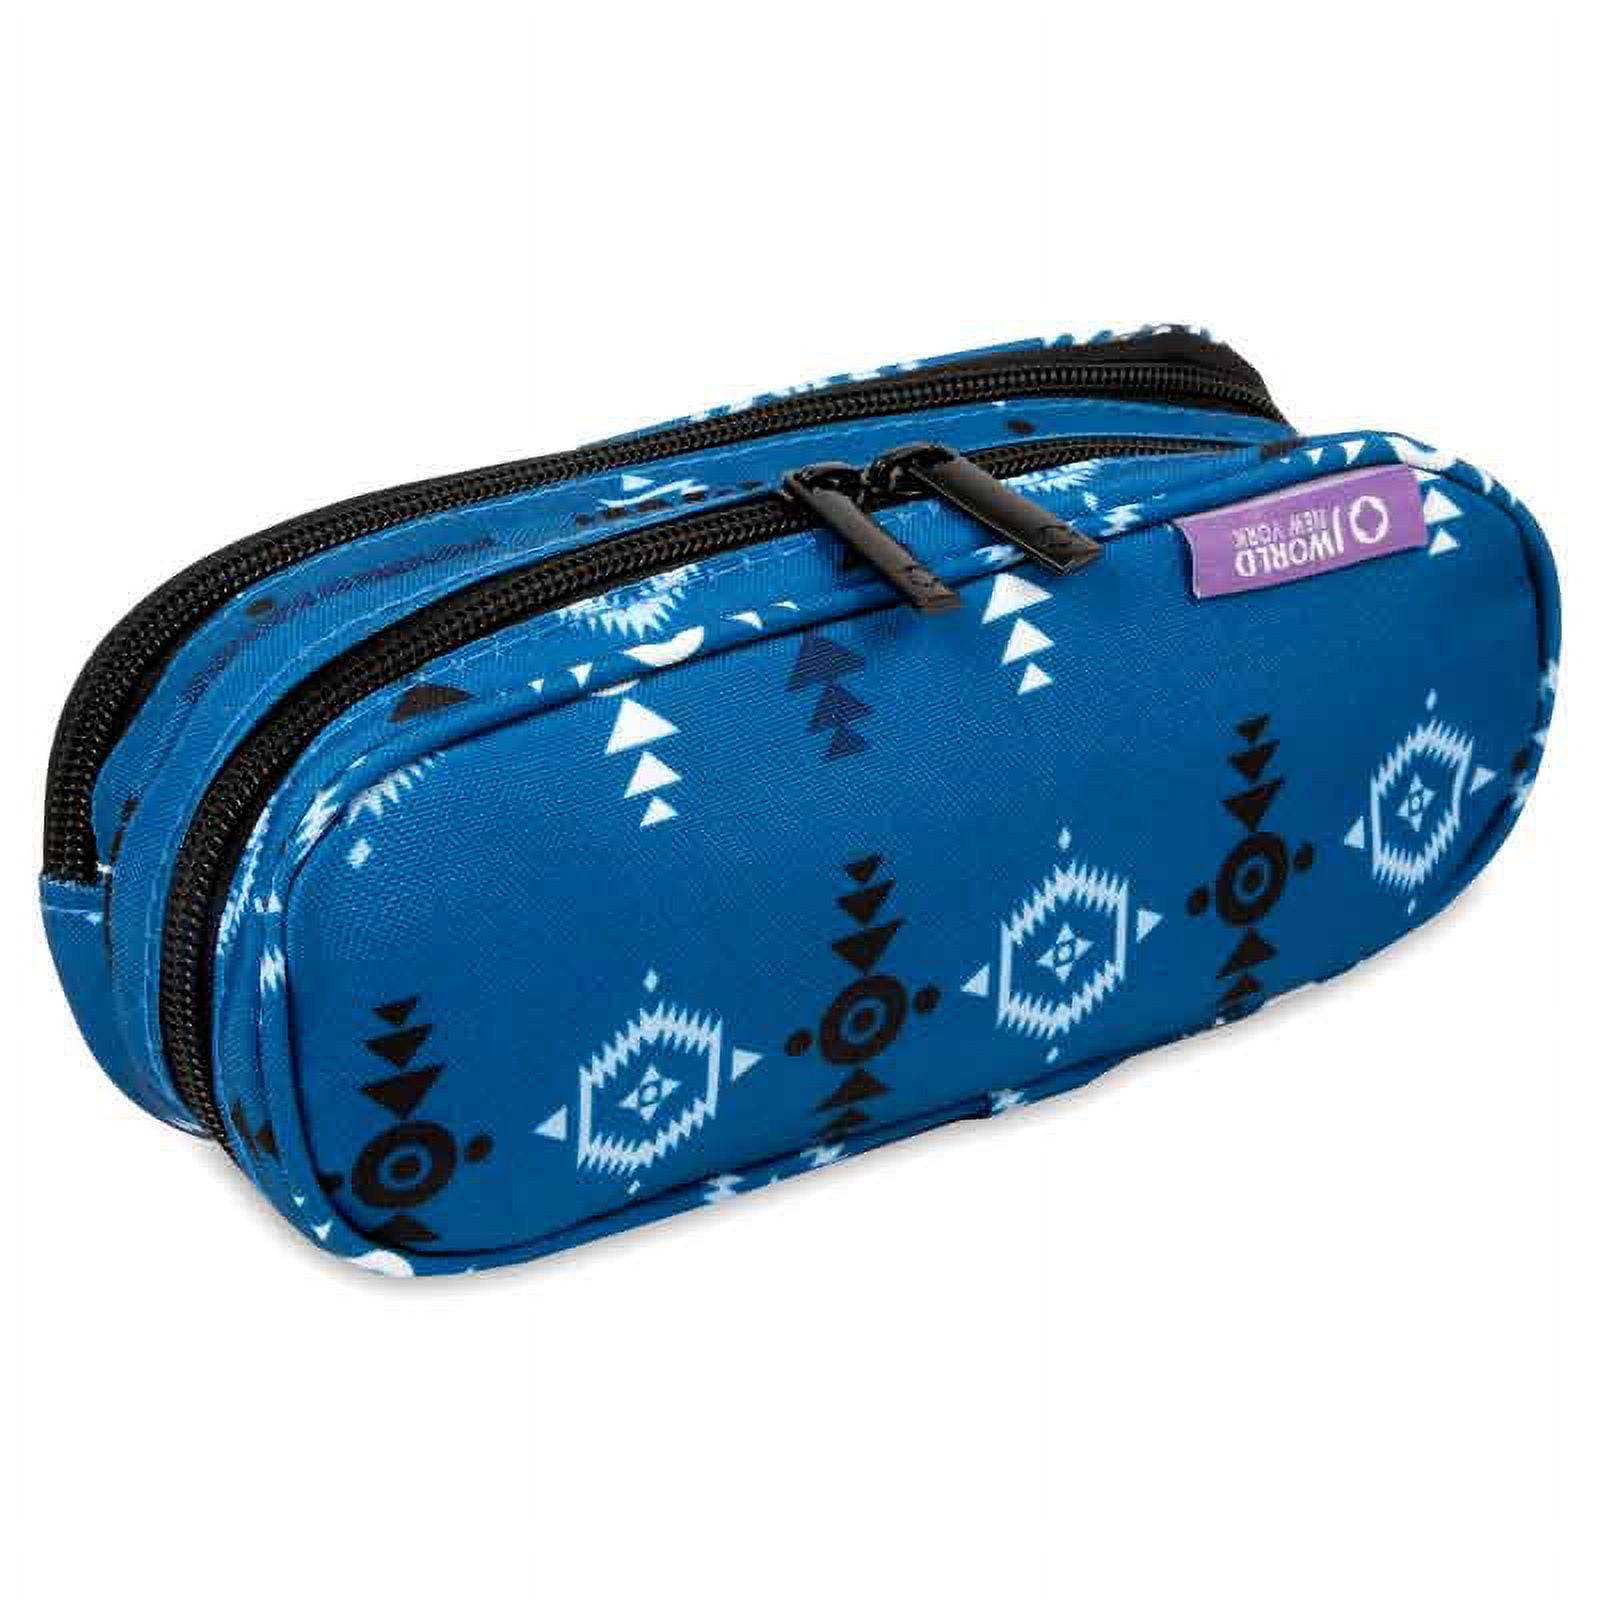 ZIPIT Monster Pencil Case for Boys, Holds up to 30 Pens, Made of One Long  Zipper! (Royal Blue)